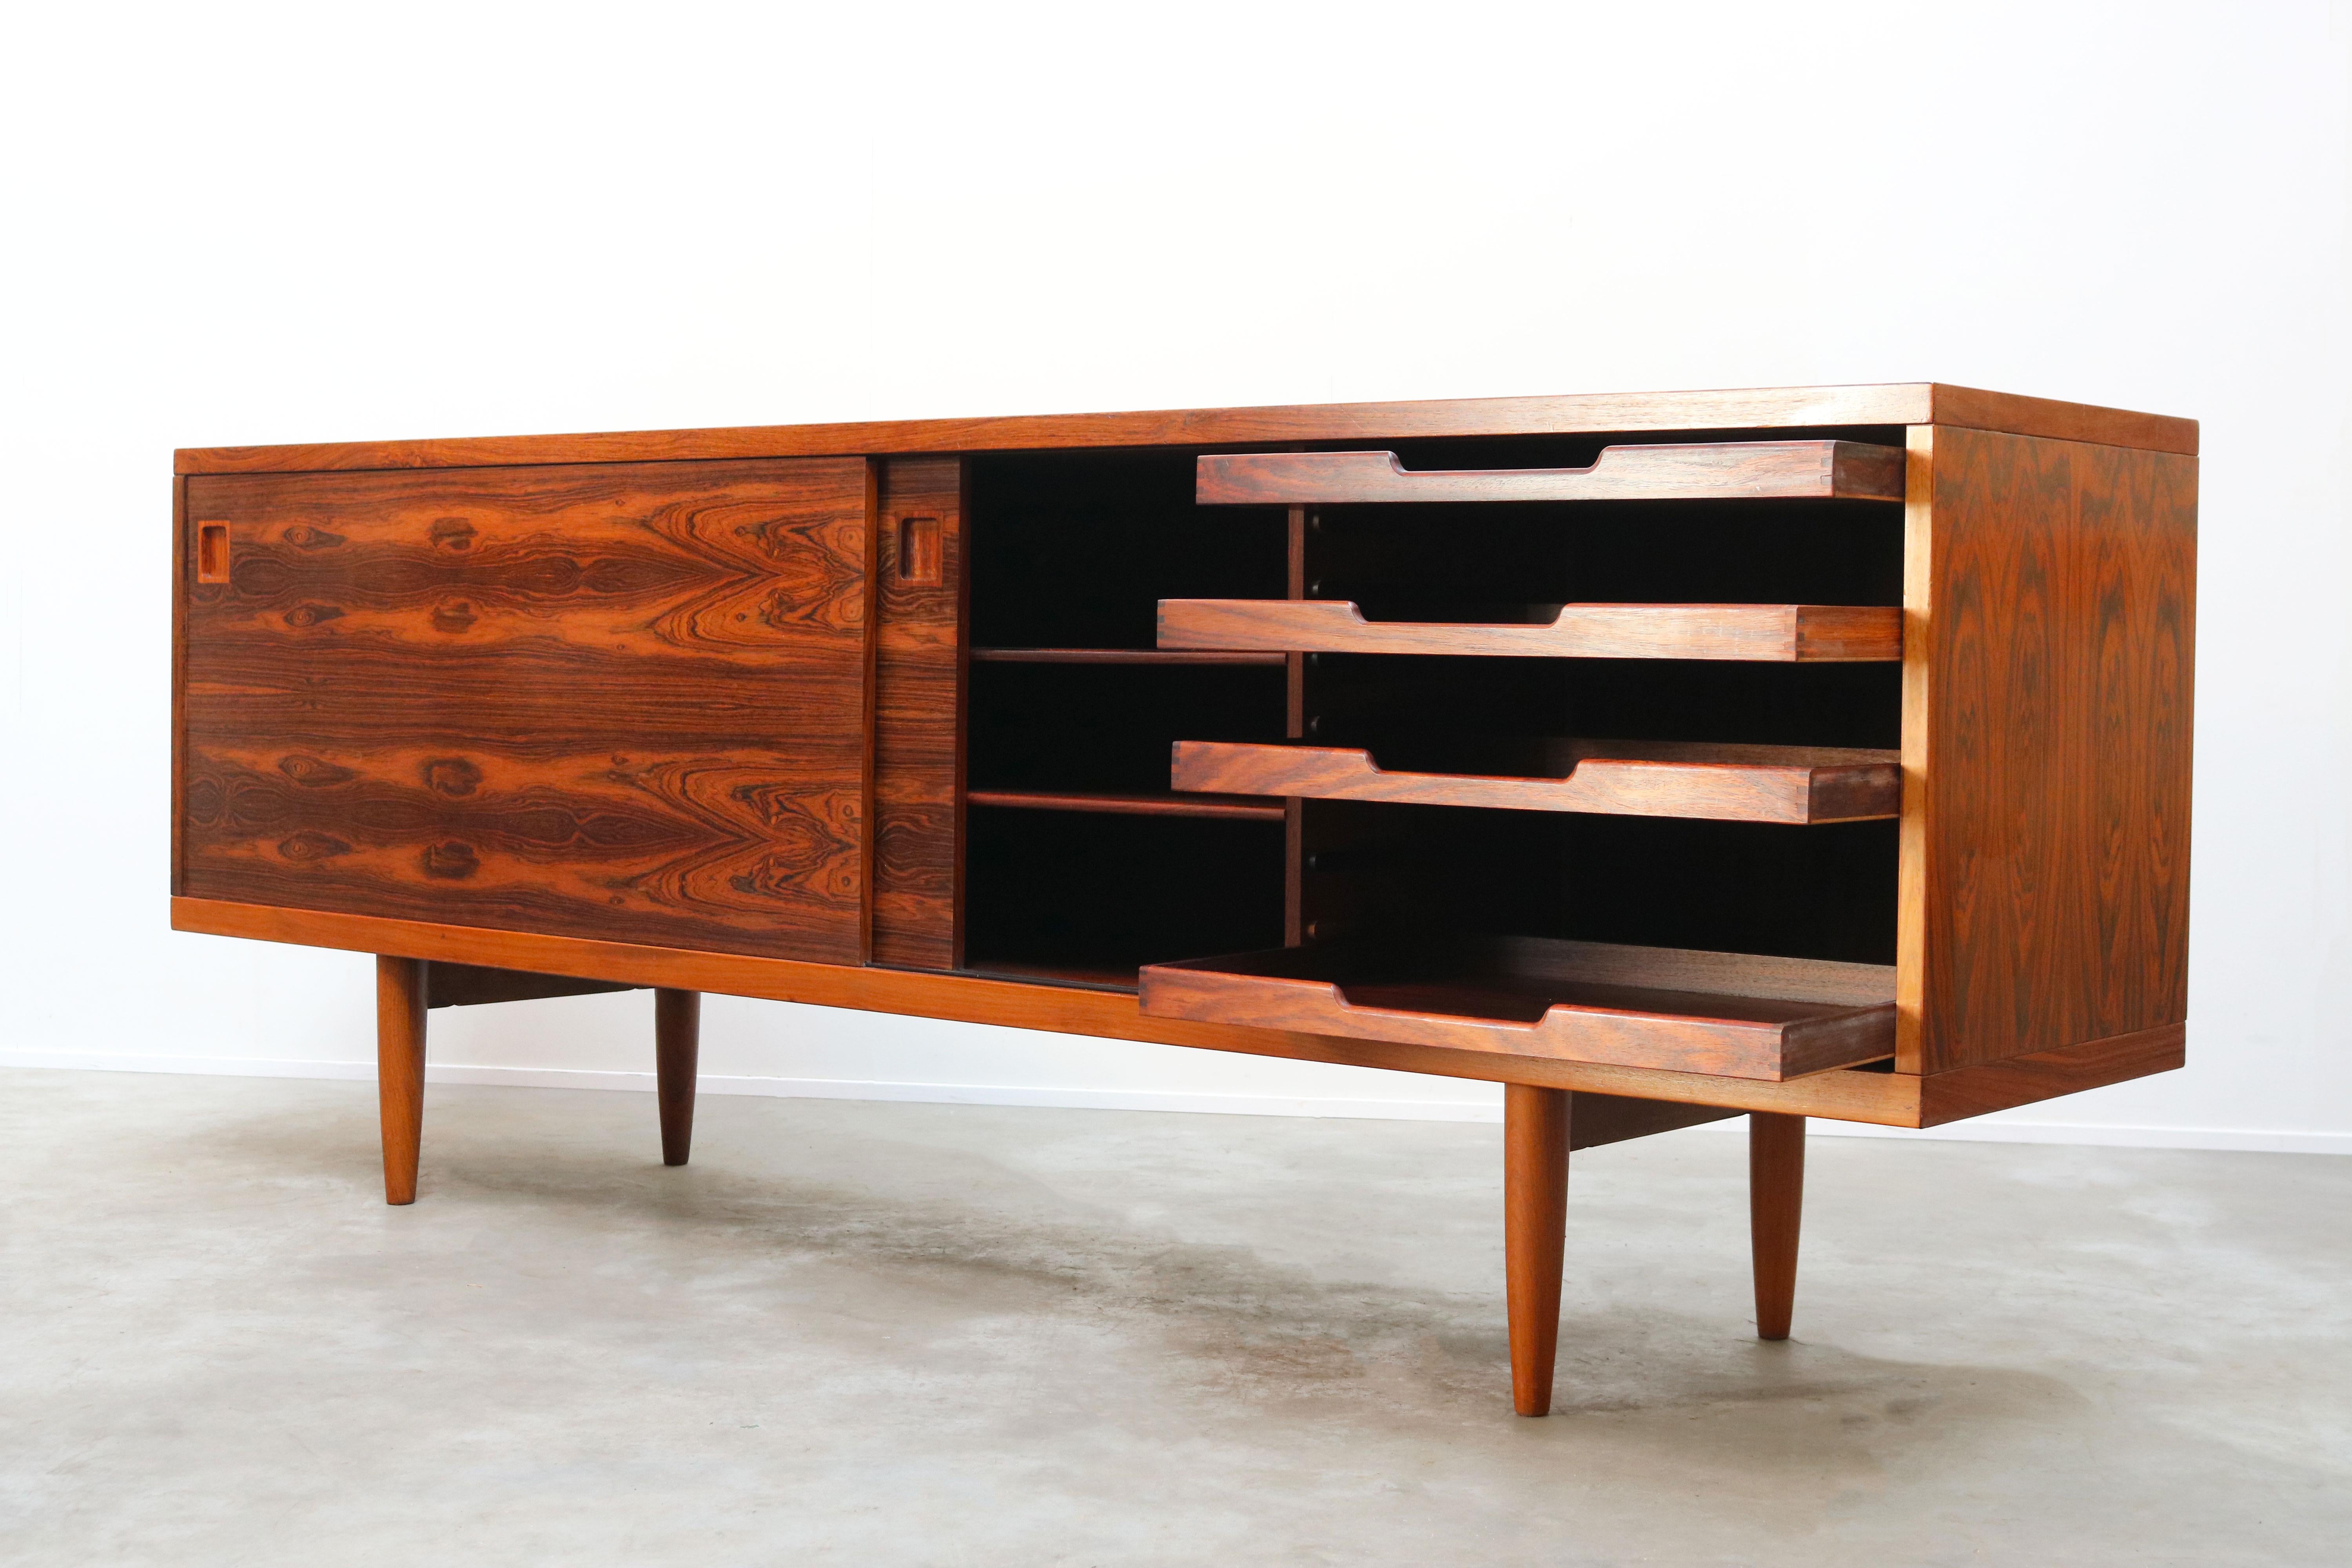 Rare Danish Credenza / Sideboard Model 20 by Niels Otto Moller 1950 Rosewood For Sale 6